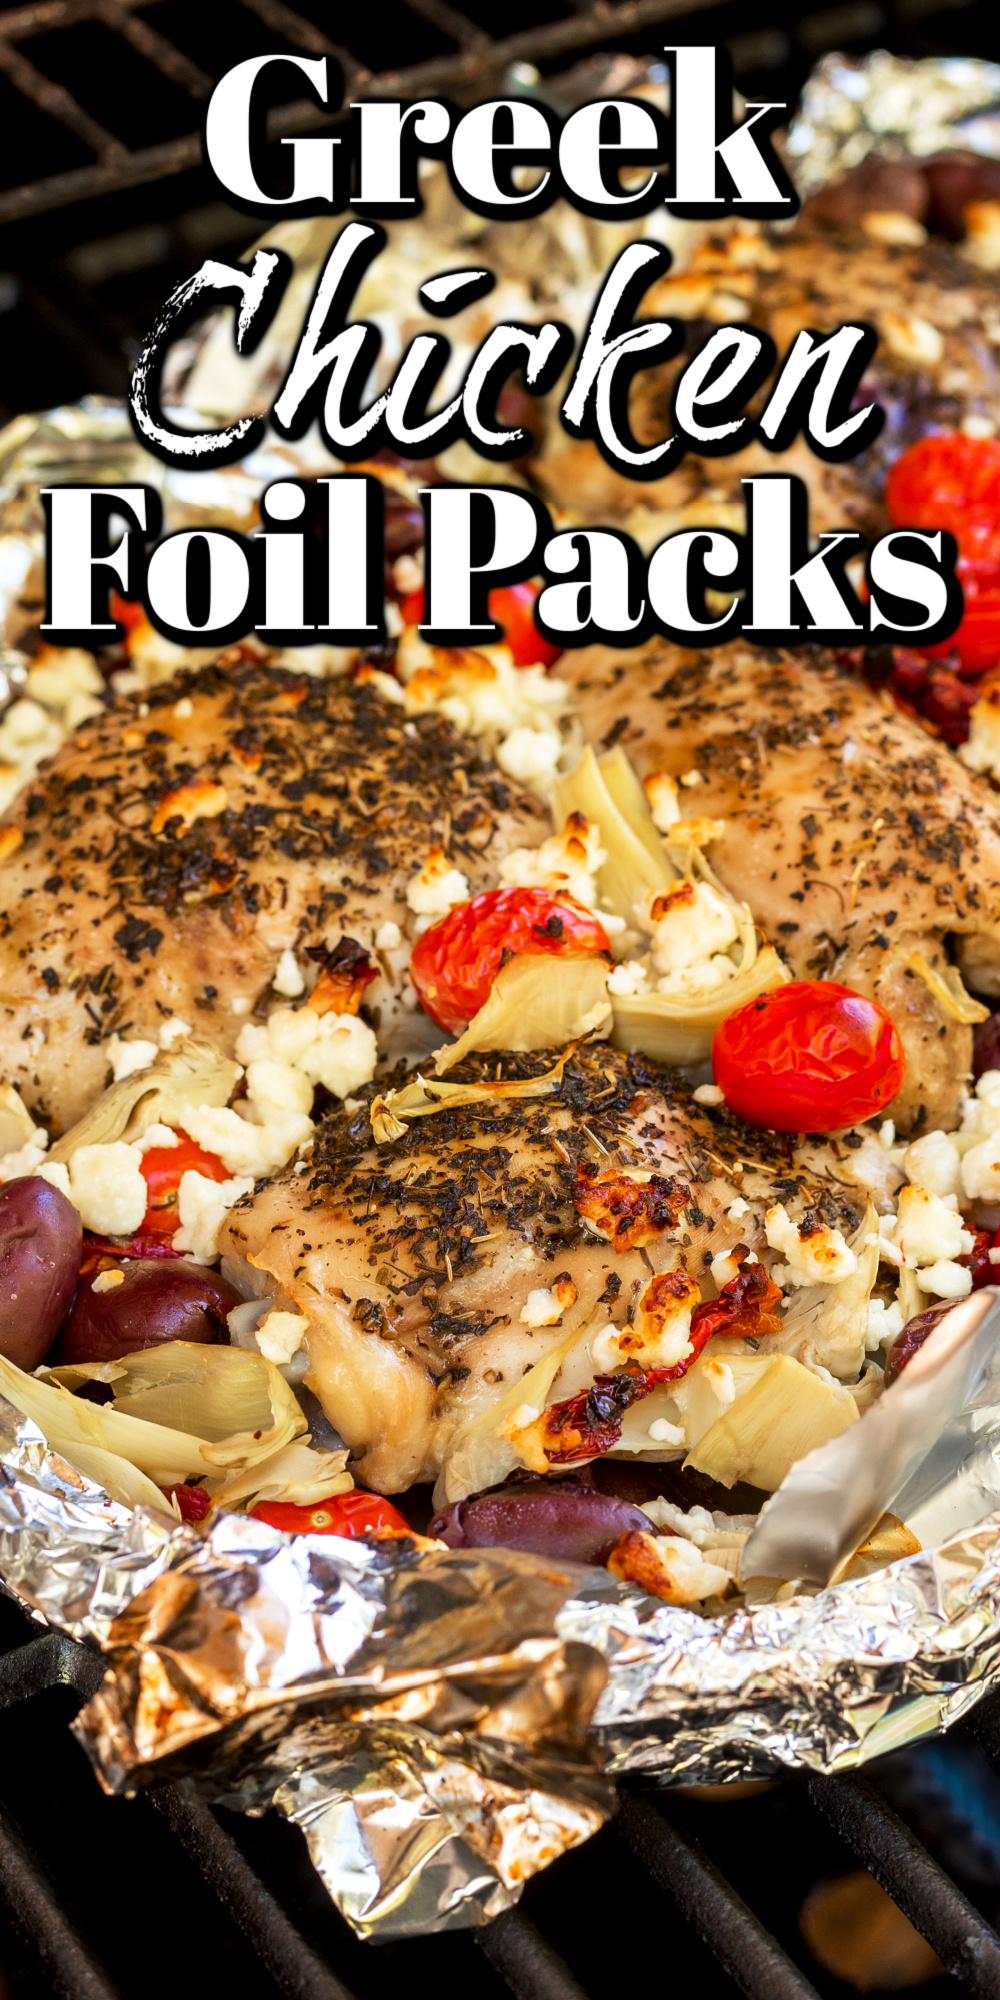 This Greek chicken foil pack cooked on the grill is so easy and oh so tasty! I know you and your family are going to love it!